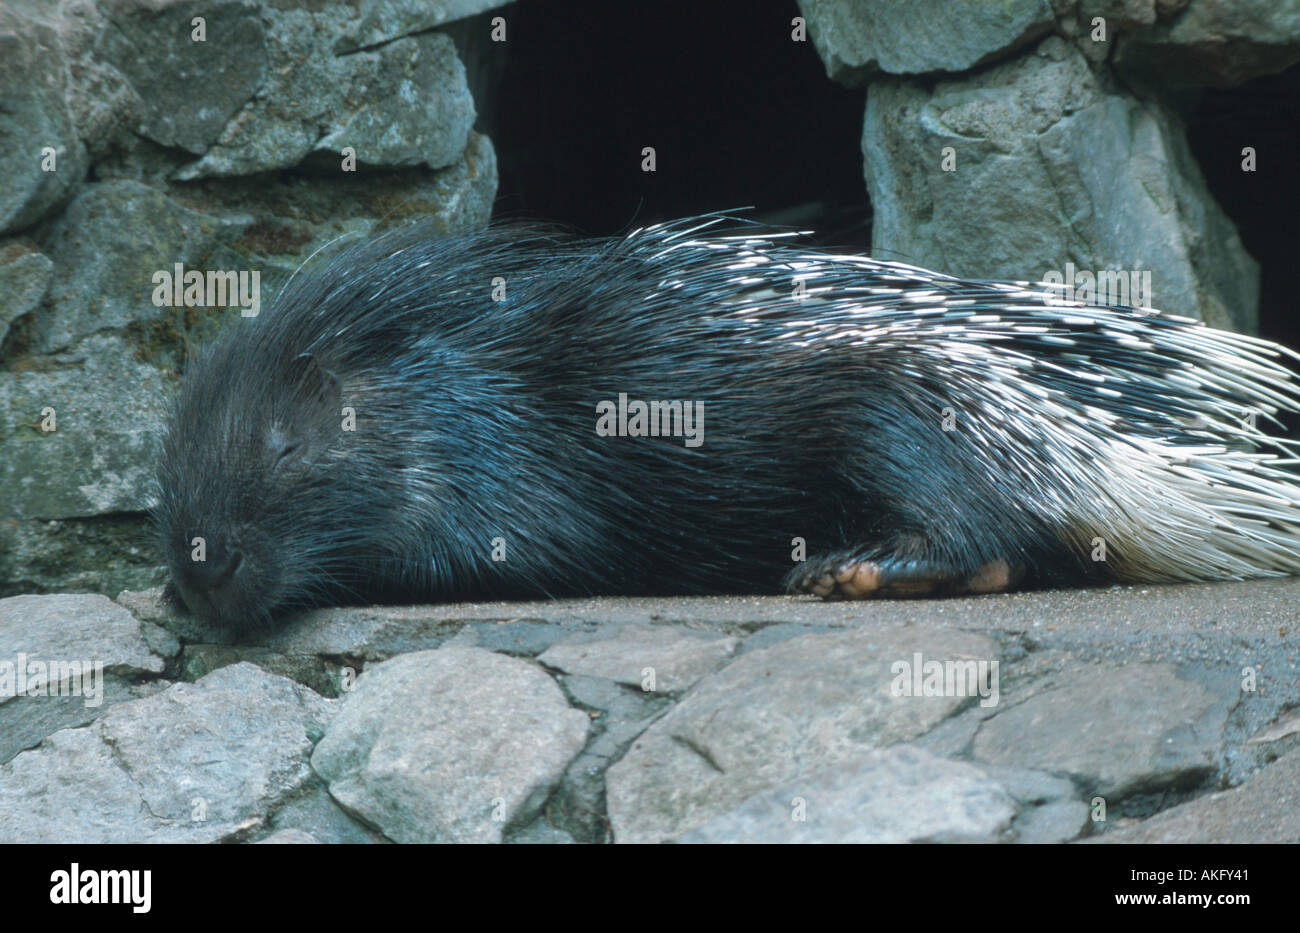 Indian crested porcupine (Hystrix indica), sleeping on a stone Stock Photo